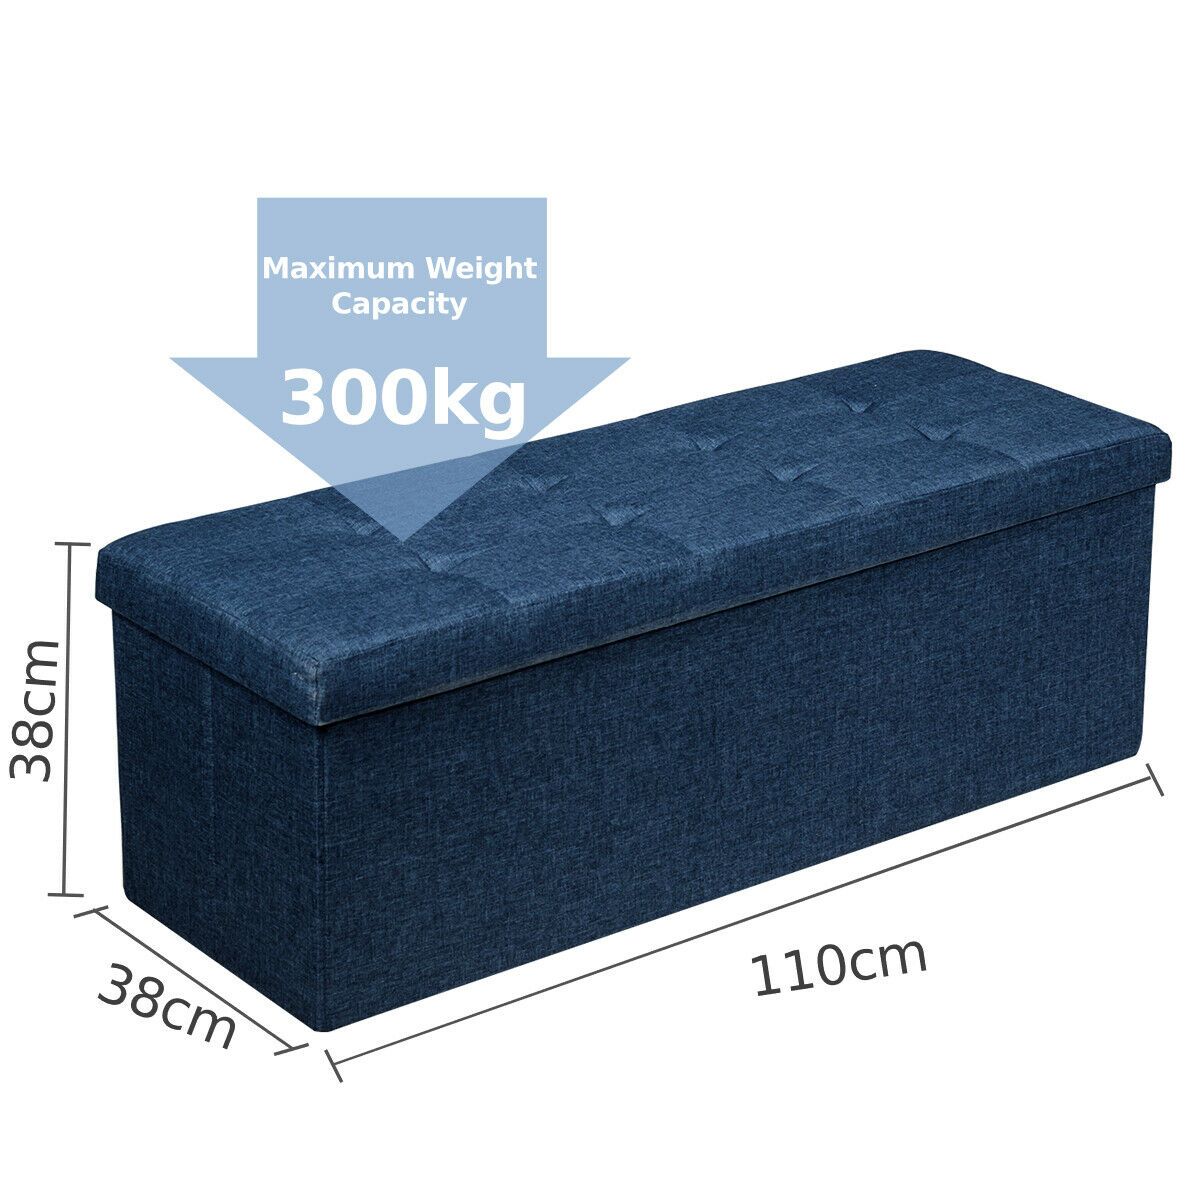 Folding Storage Ottoman Bench with Lid for Hallway or Bedroom - Navy